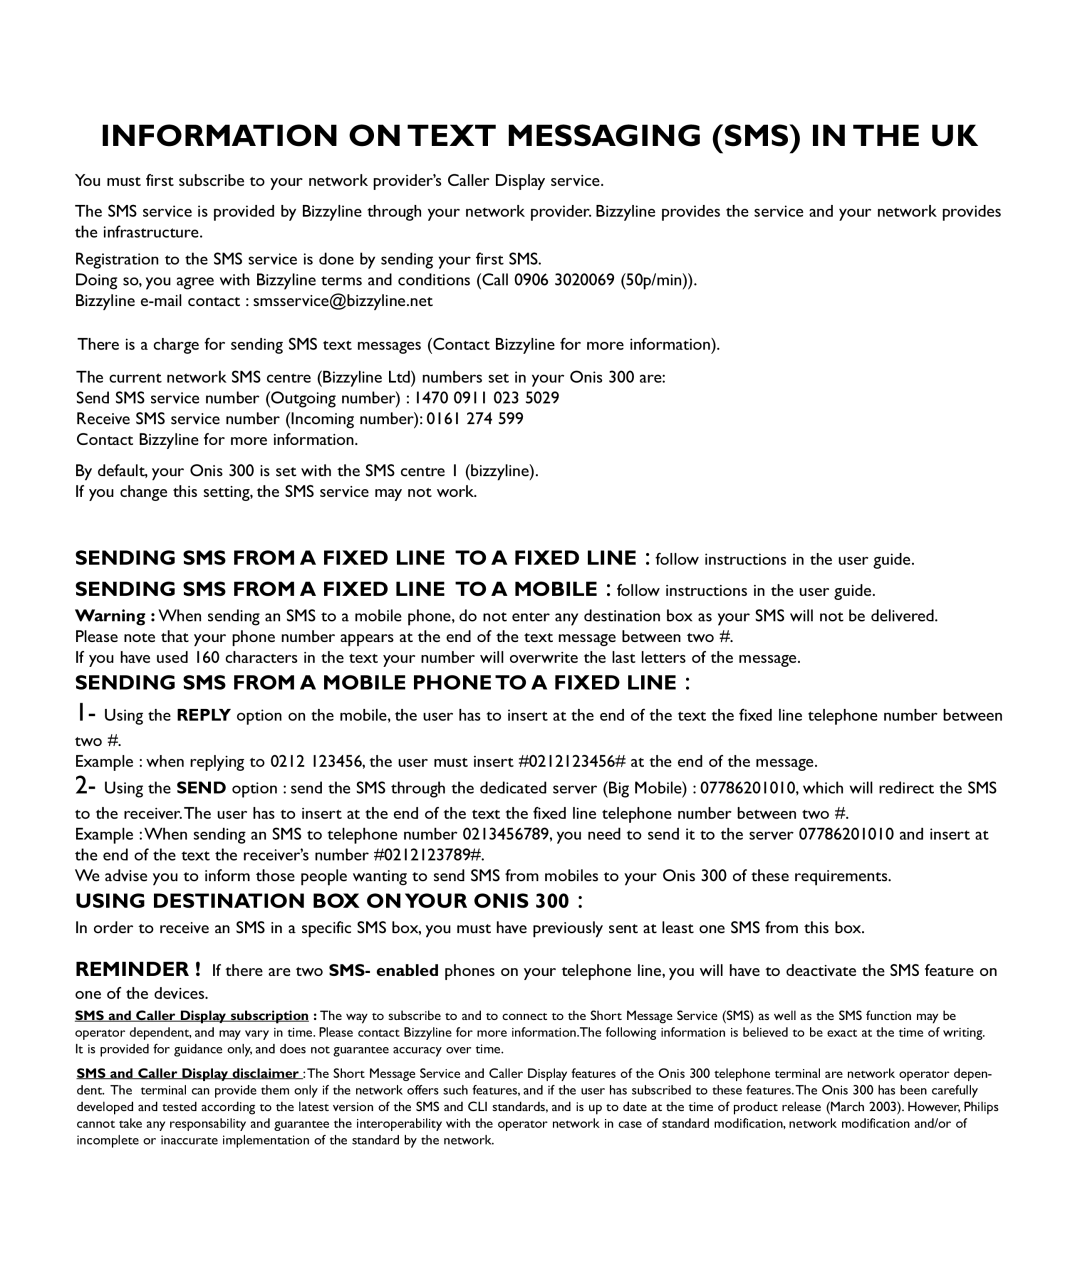 Philips Onis 380 Vox manual Information On Text Messaging Sms In The Uk, Sending Sms From A Mobile Phone To A Fixed Line 